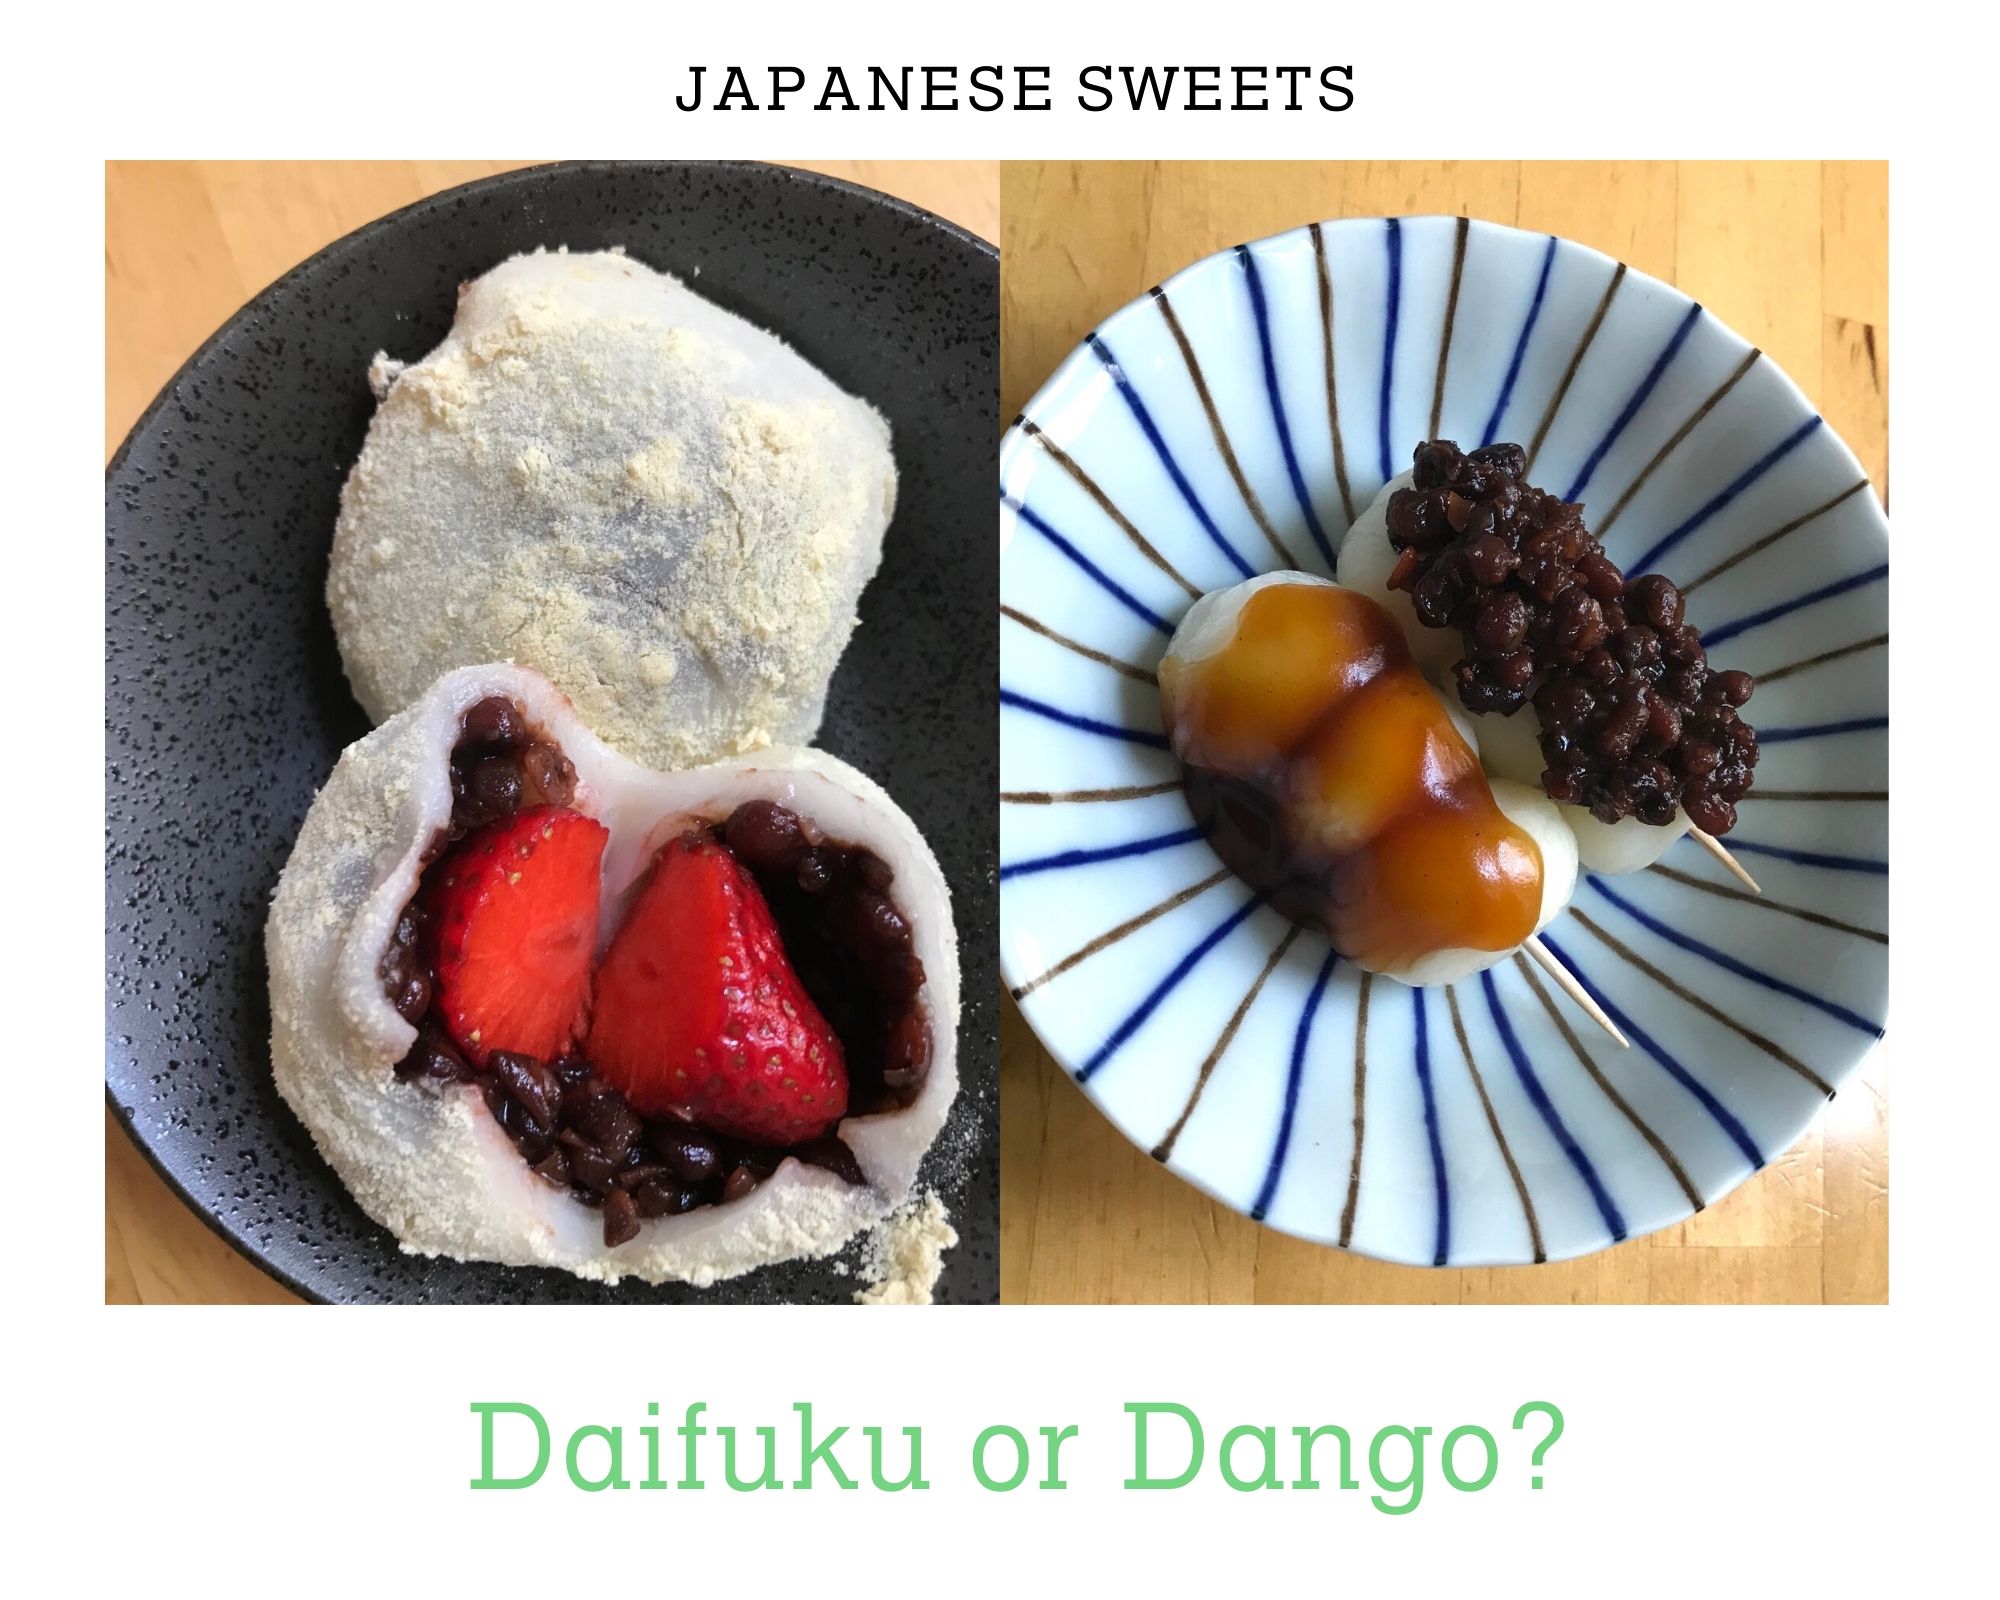 You are currently viewing Dango or Daifuku, which is easier to make?